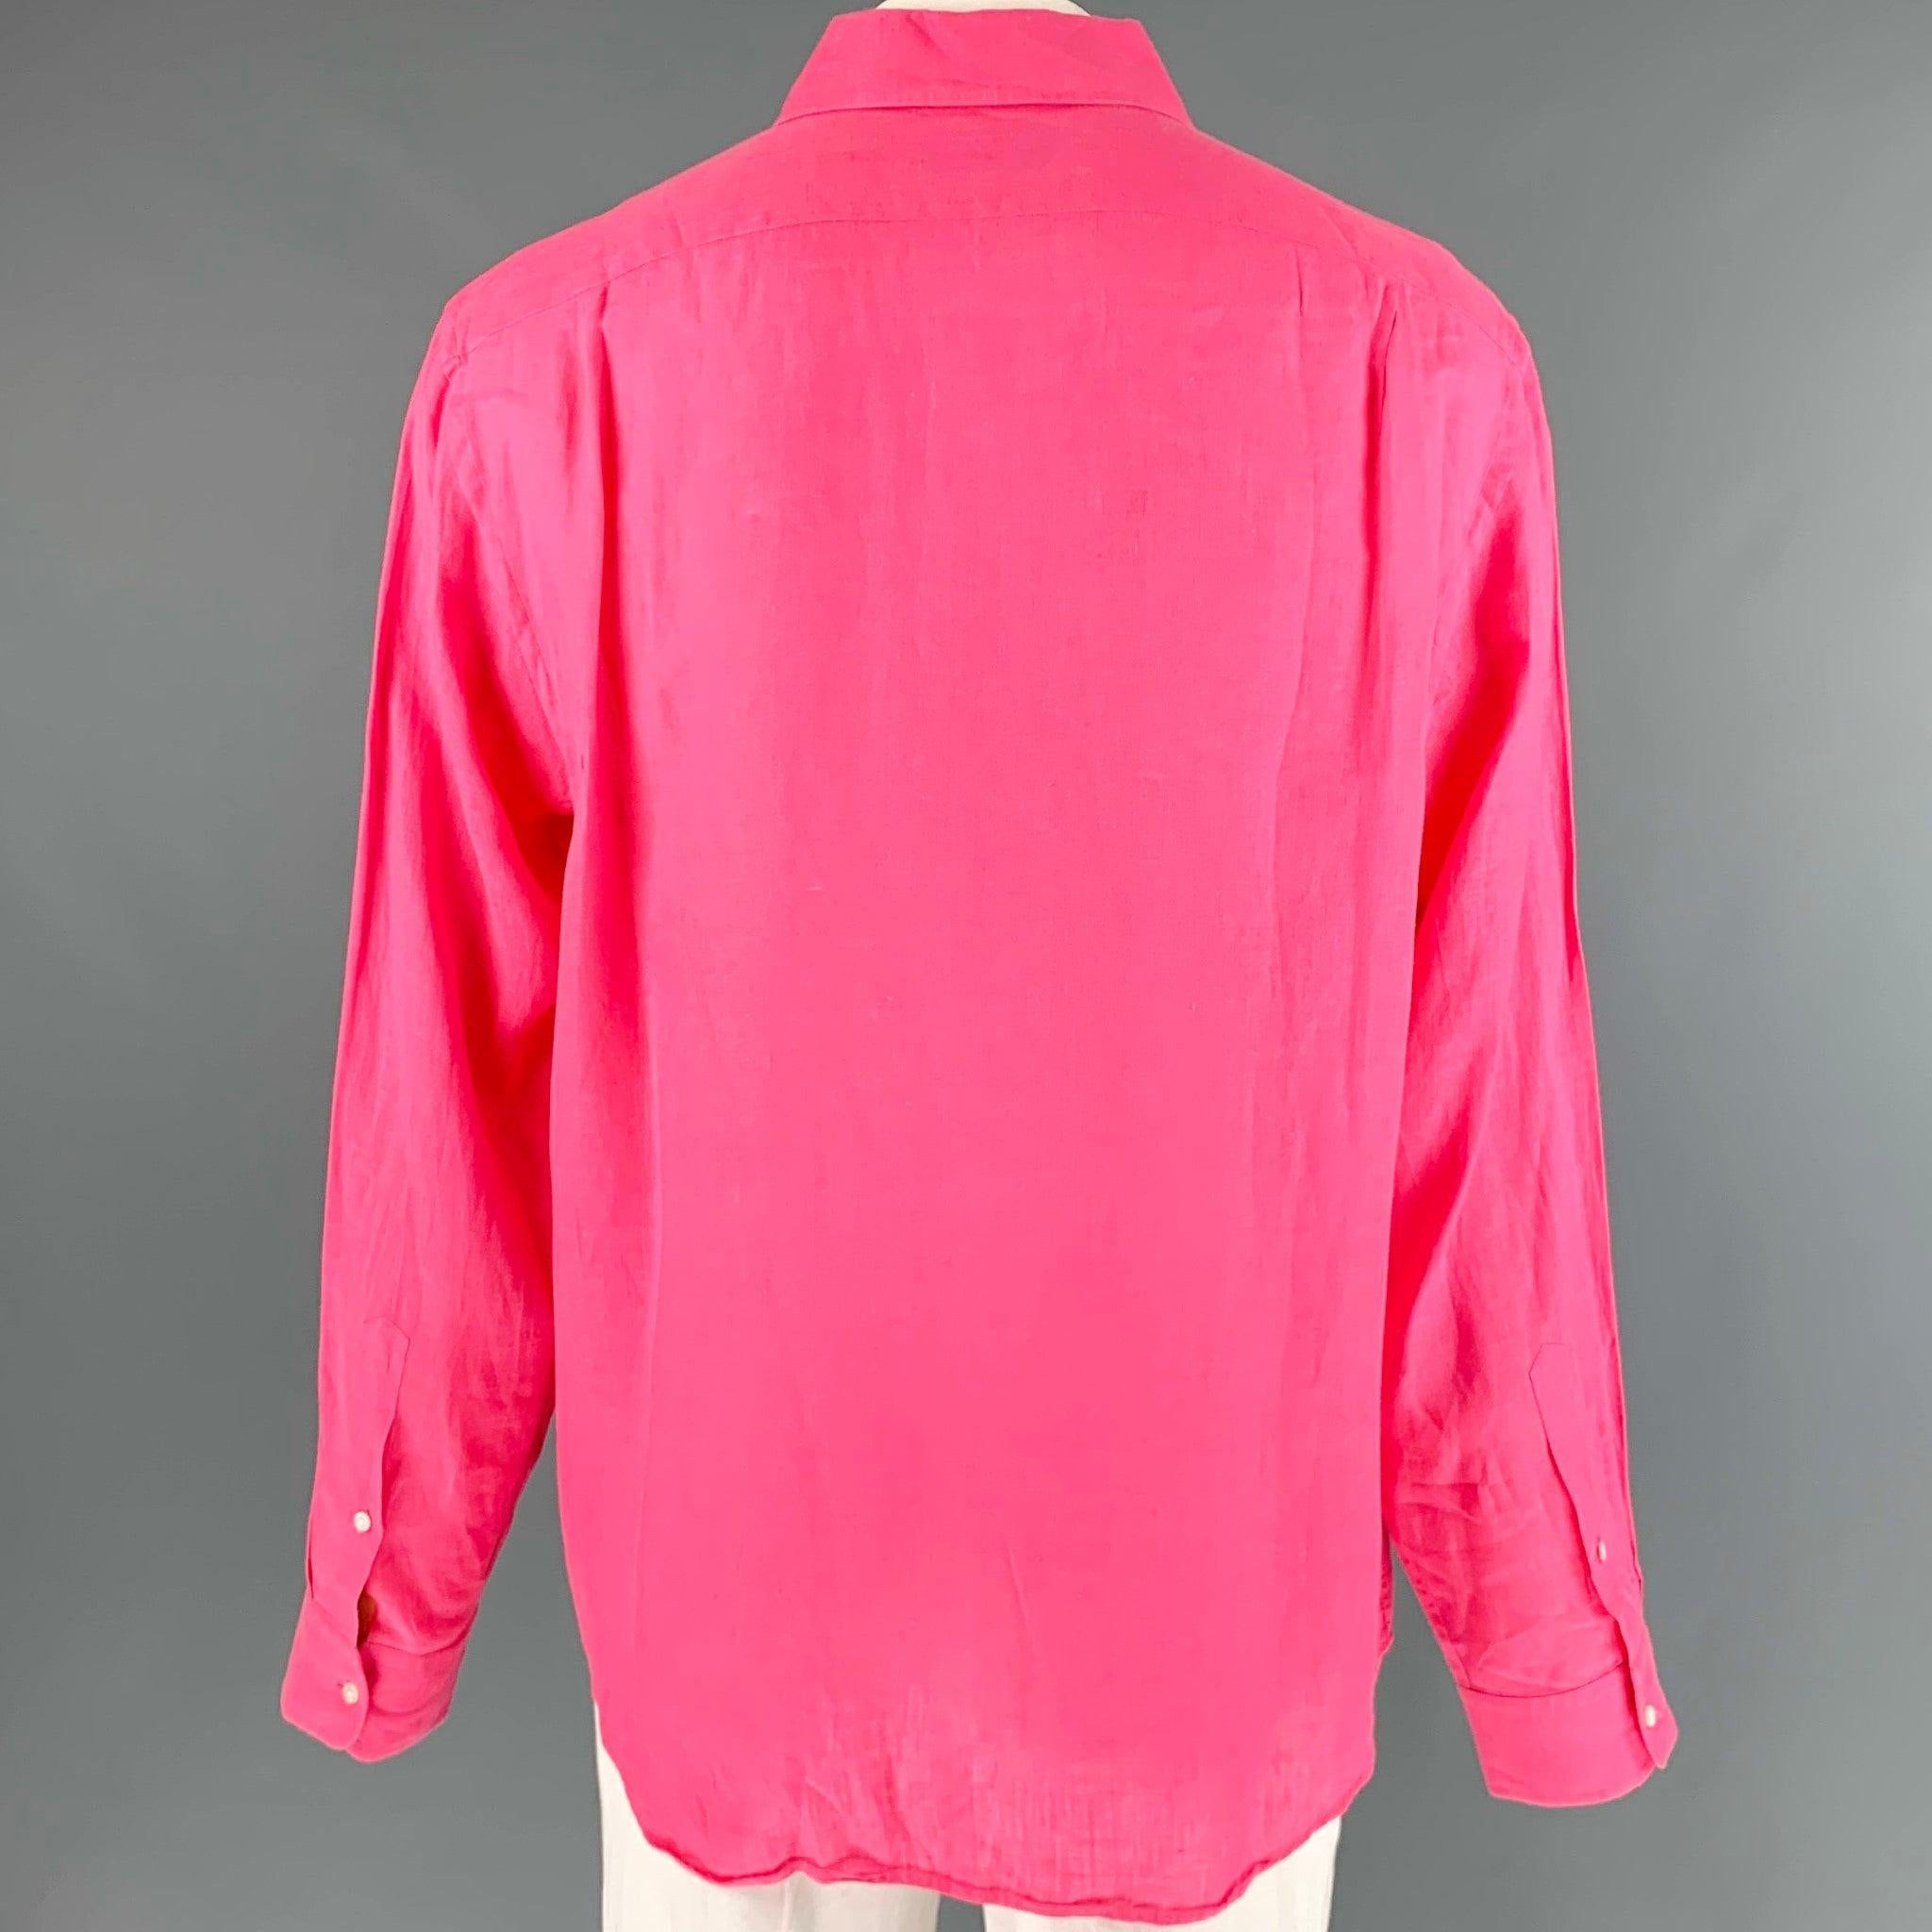 RALPH LAUREN Size XXL Pink Linen Spread Collar Long Sleeve Shirt In Good Condition For Sale In San Francisco, CA